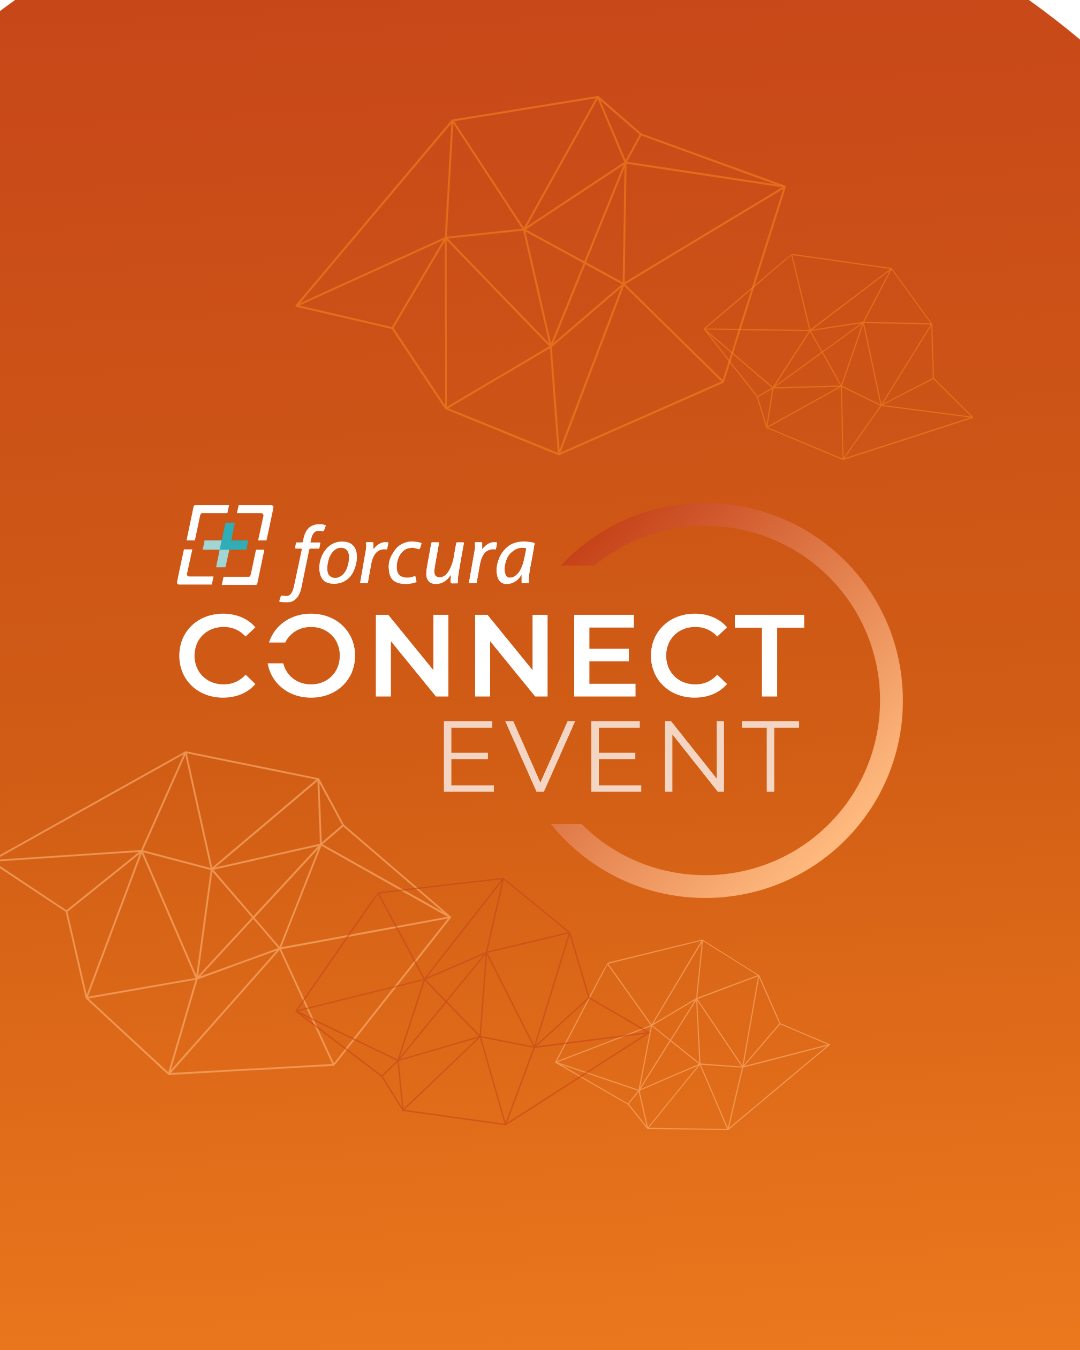 Forcura-Connect-Graphic (1)